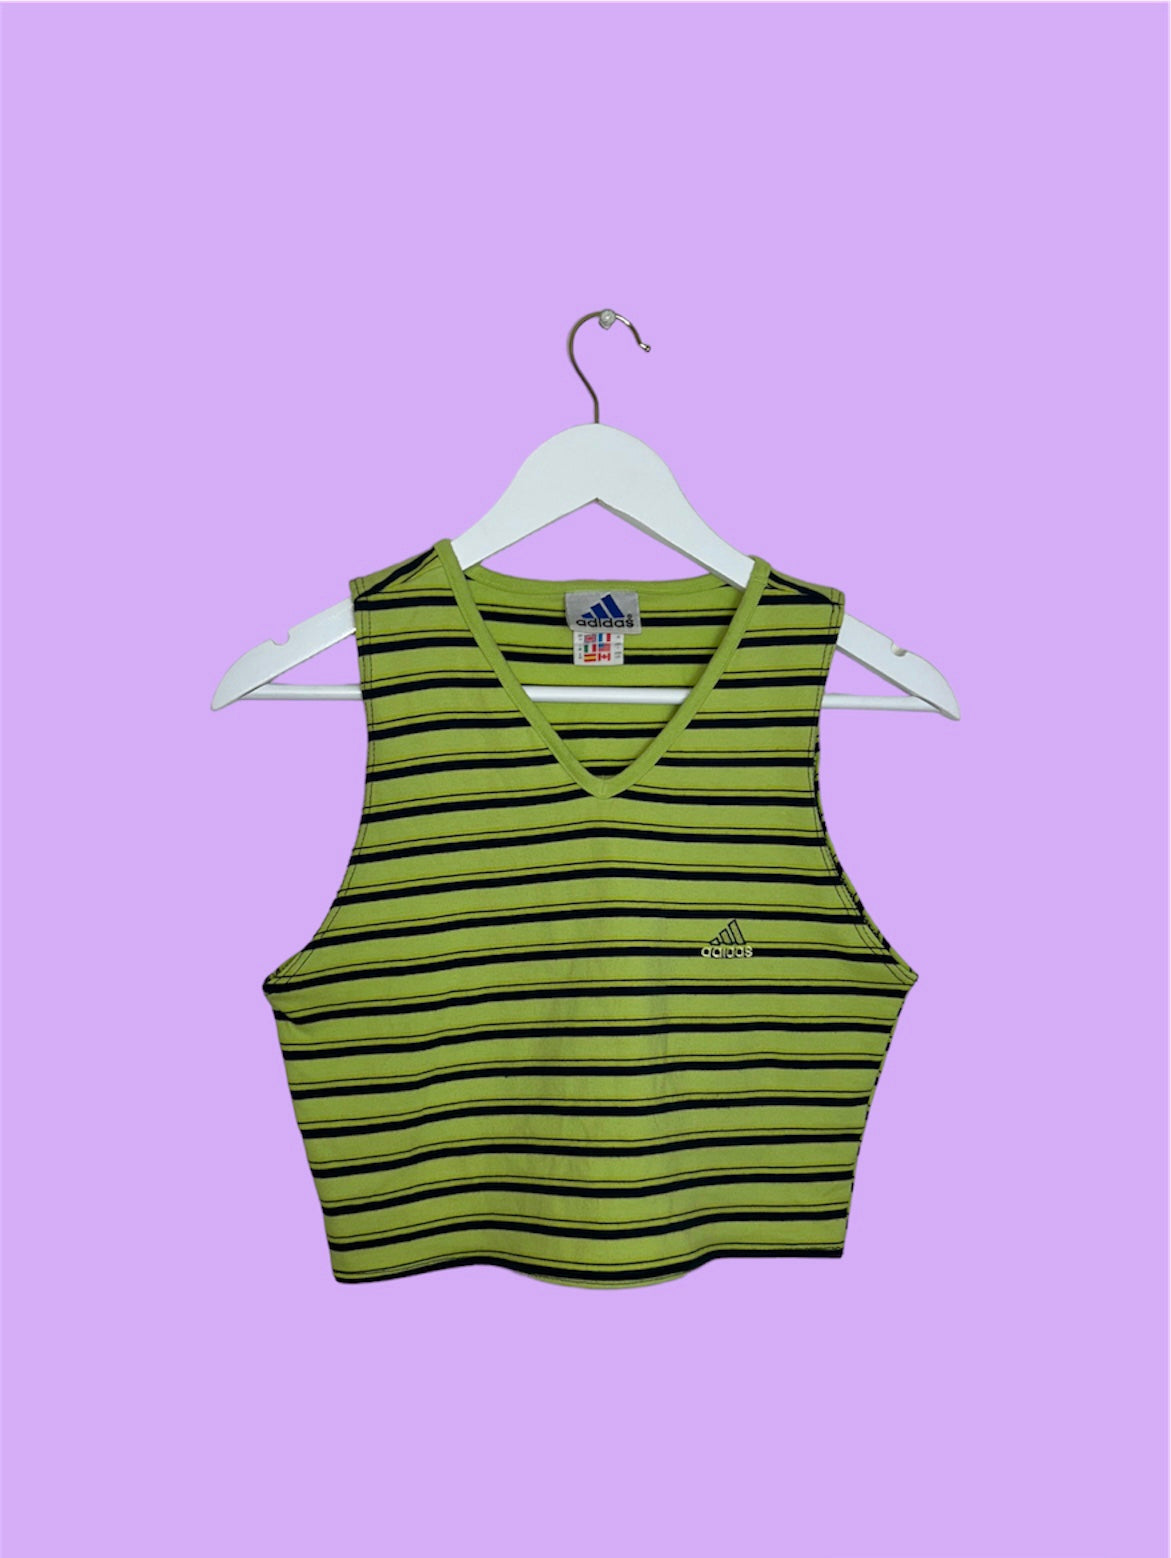 green and black sleeveless crop top with small adidas logo shown on a lilac background